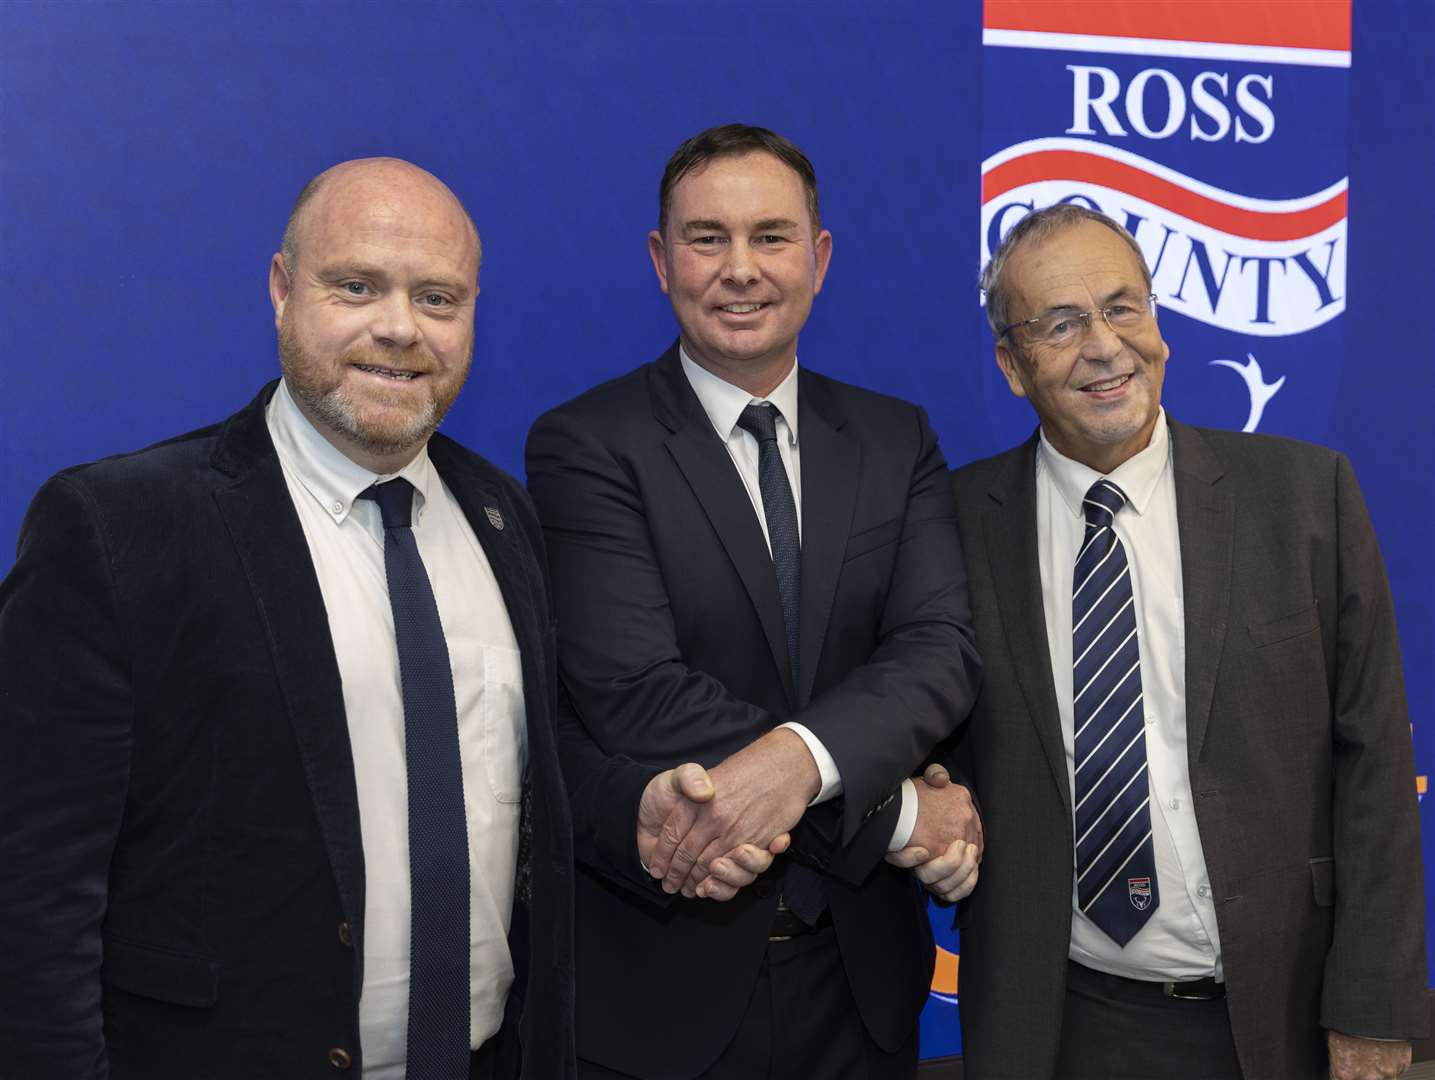 Ross County new manager Derek Adams welcomed by CEO Steve Ferguson and club chairman Roy MacGregor. Picture: Ken Macpherson